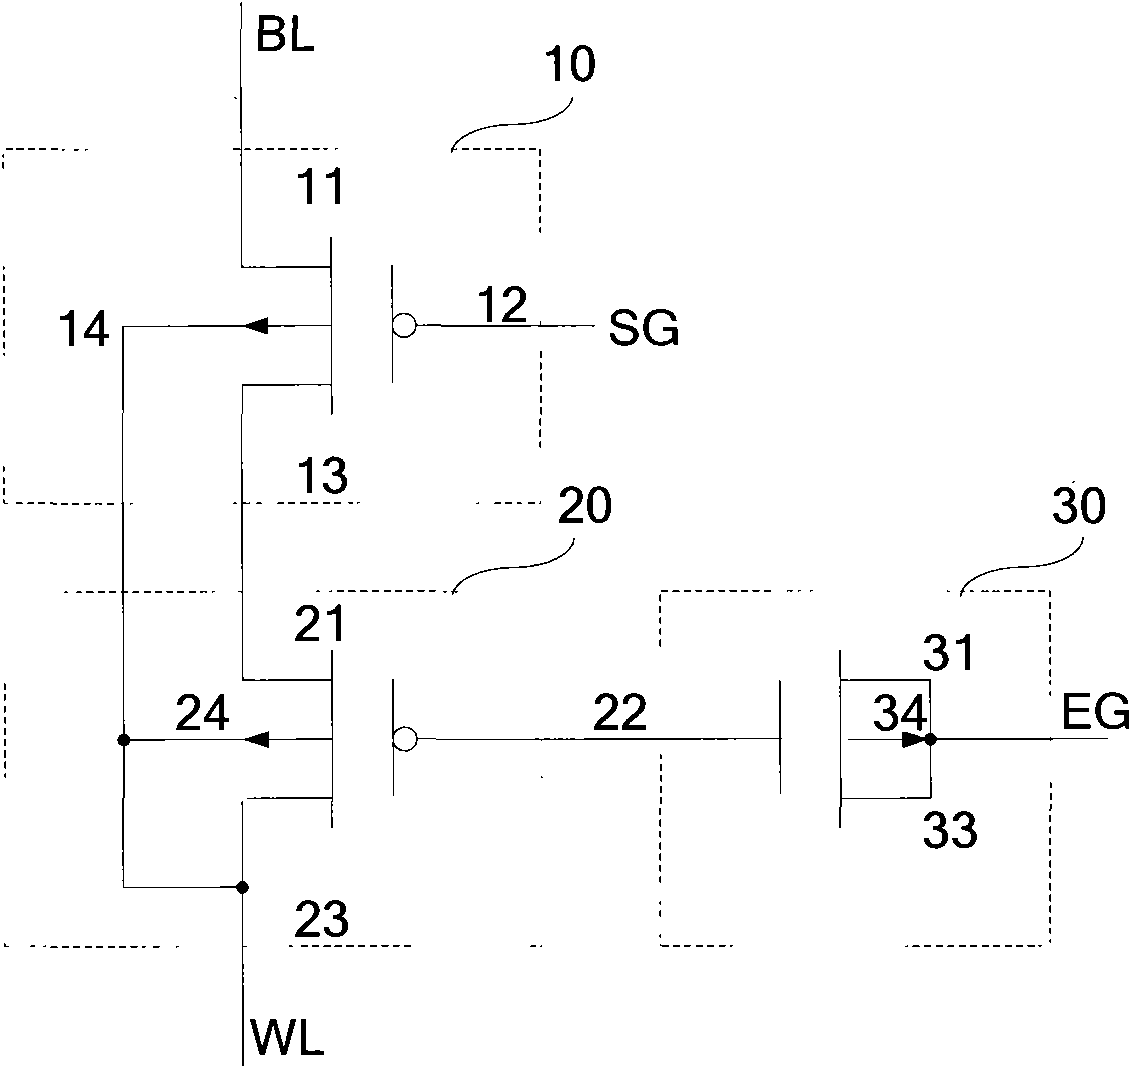 Unit structure of MTP (Multi-Time Programmable) device